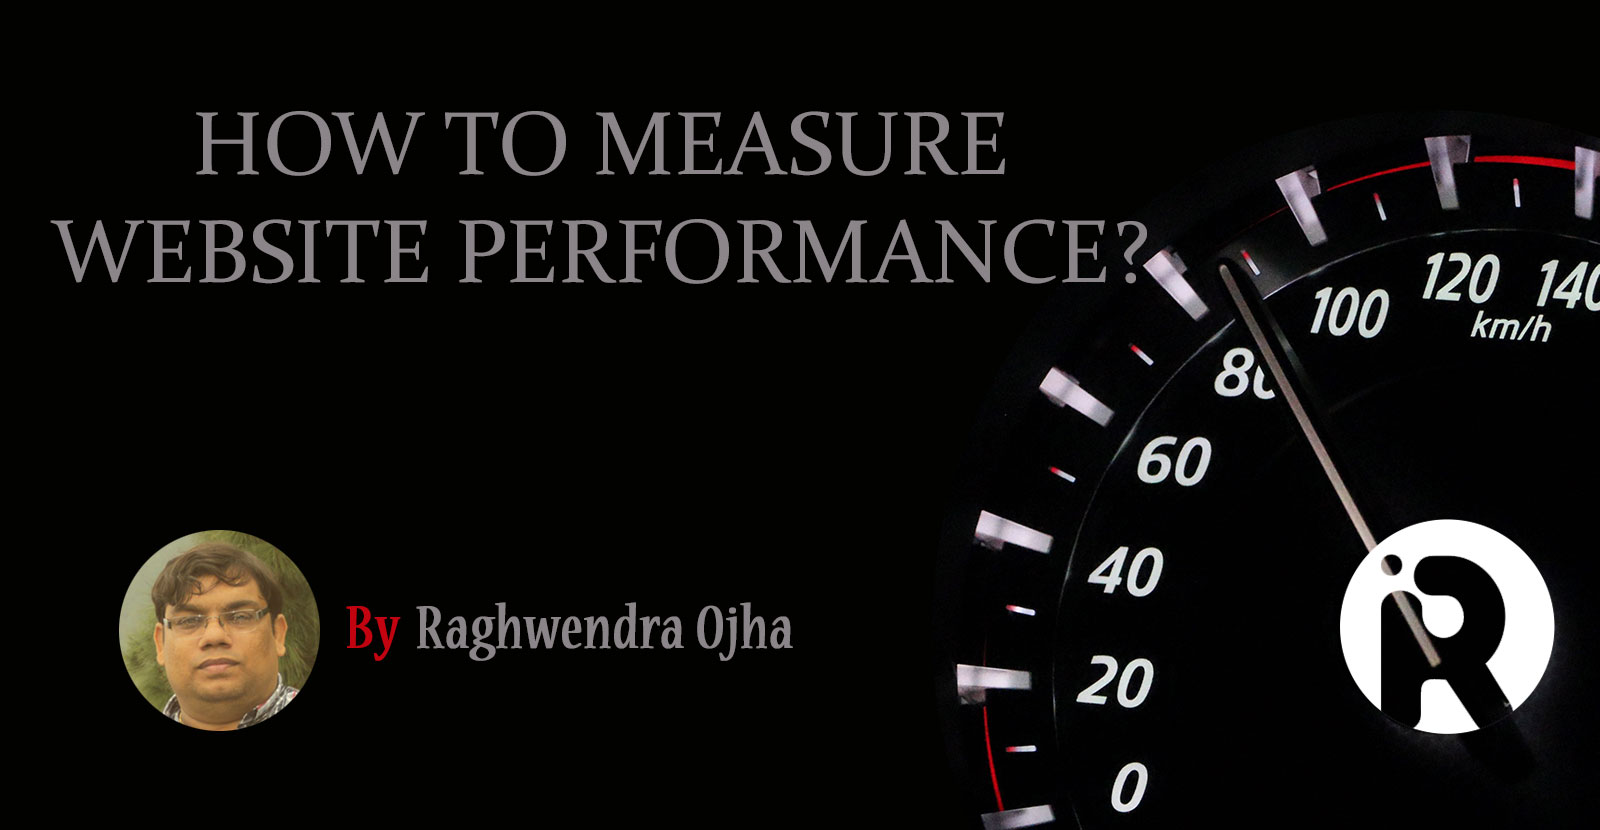 How to Measure Website Performance?